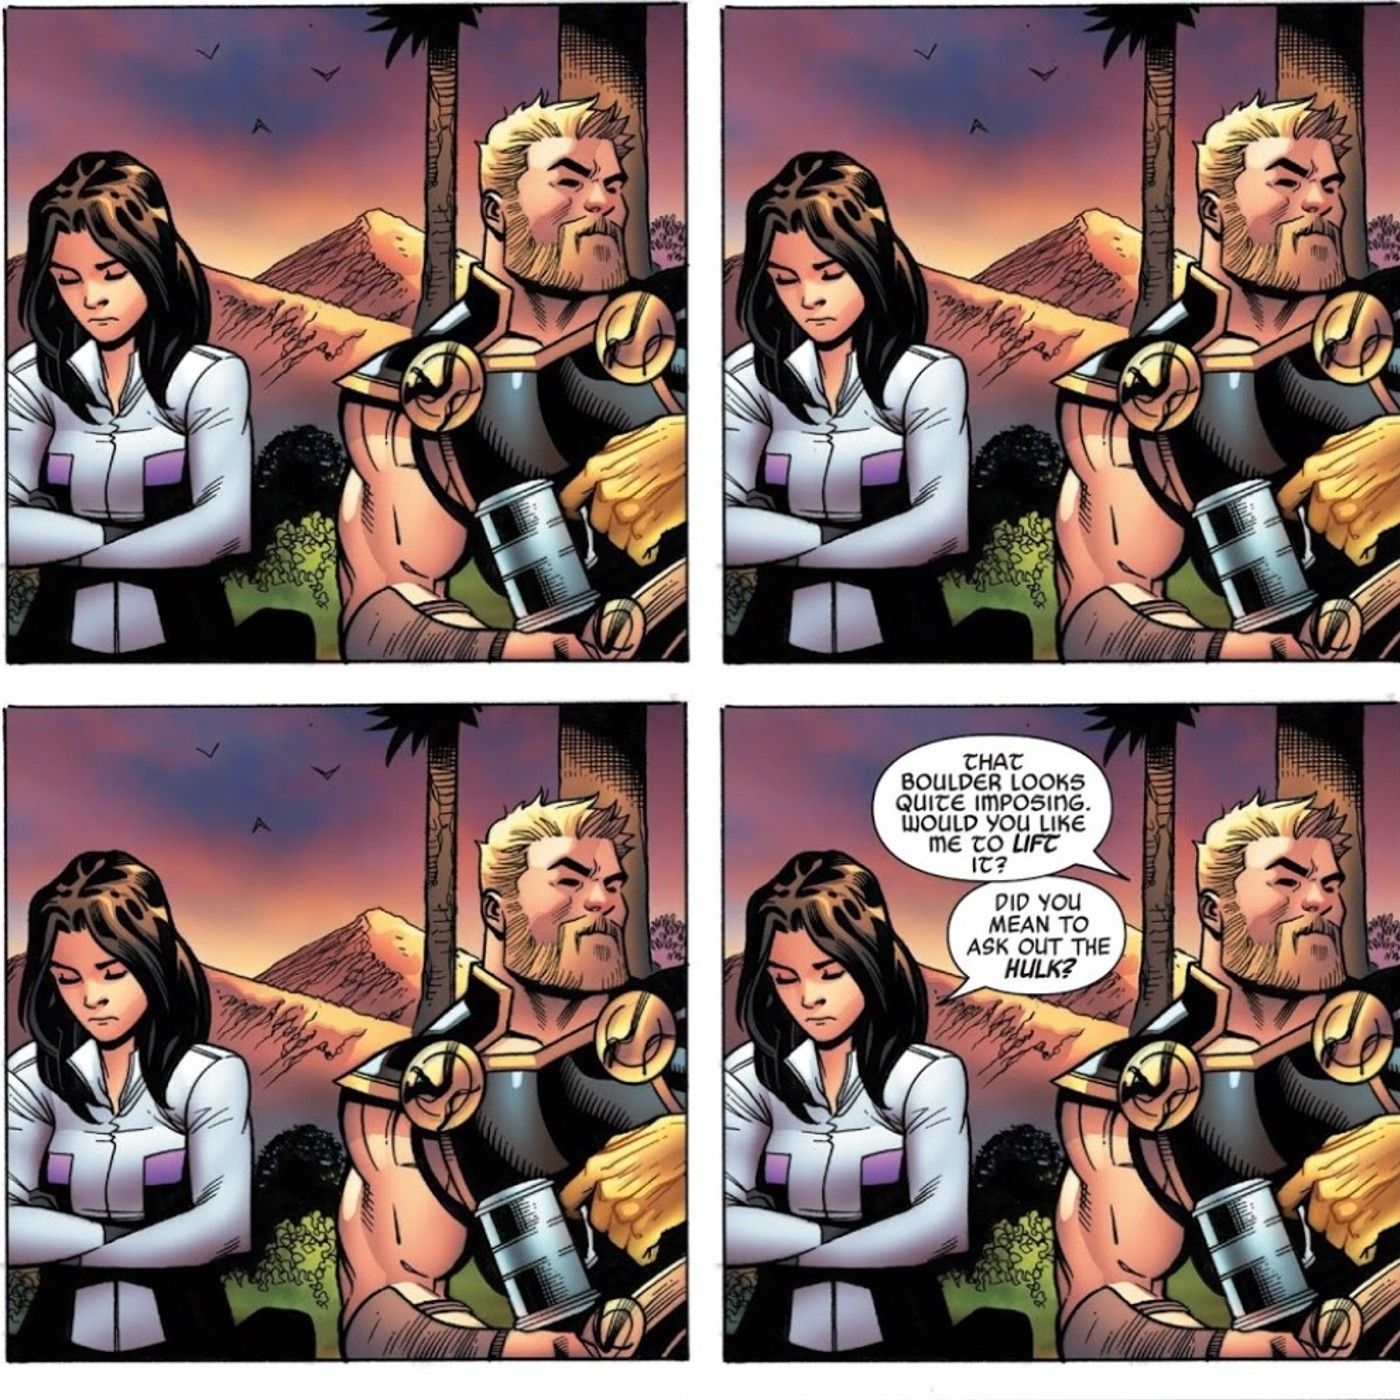 Jennifer Walters thinks Thor only wants to date She-Hulk.